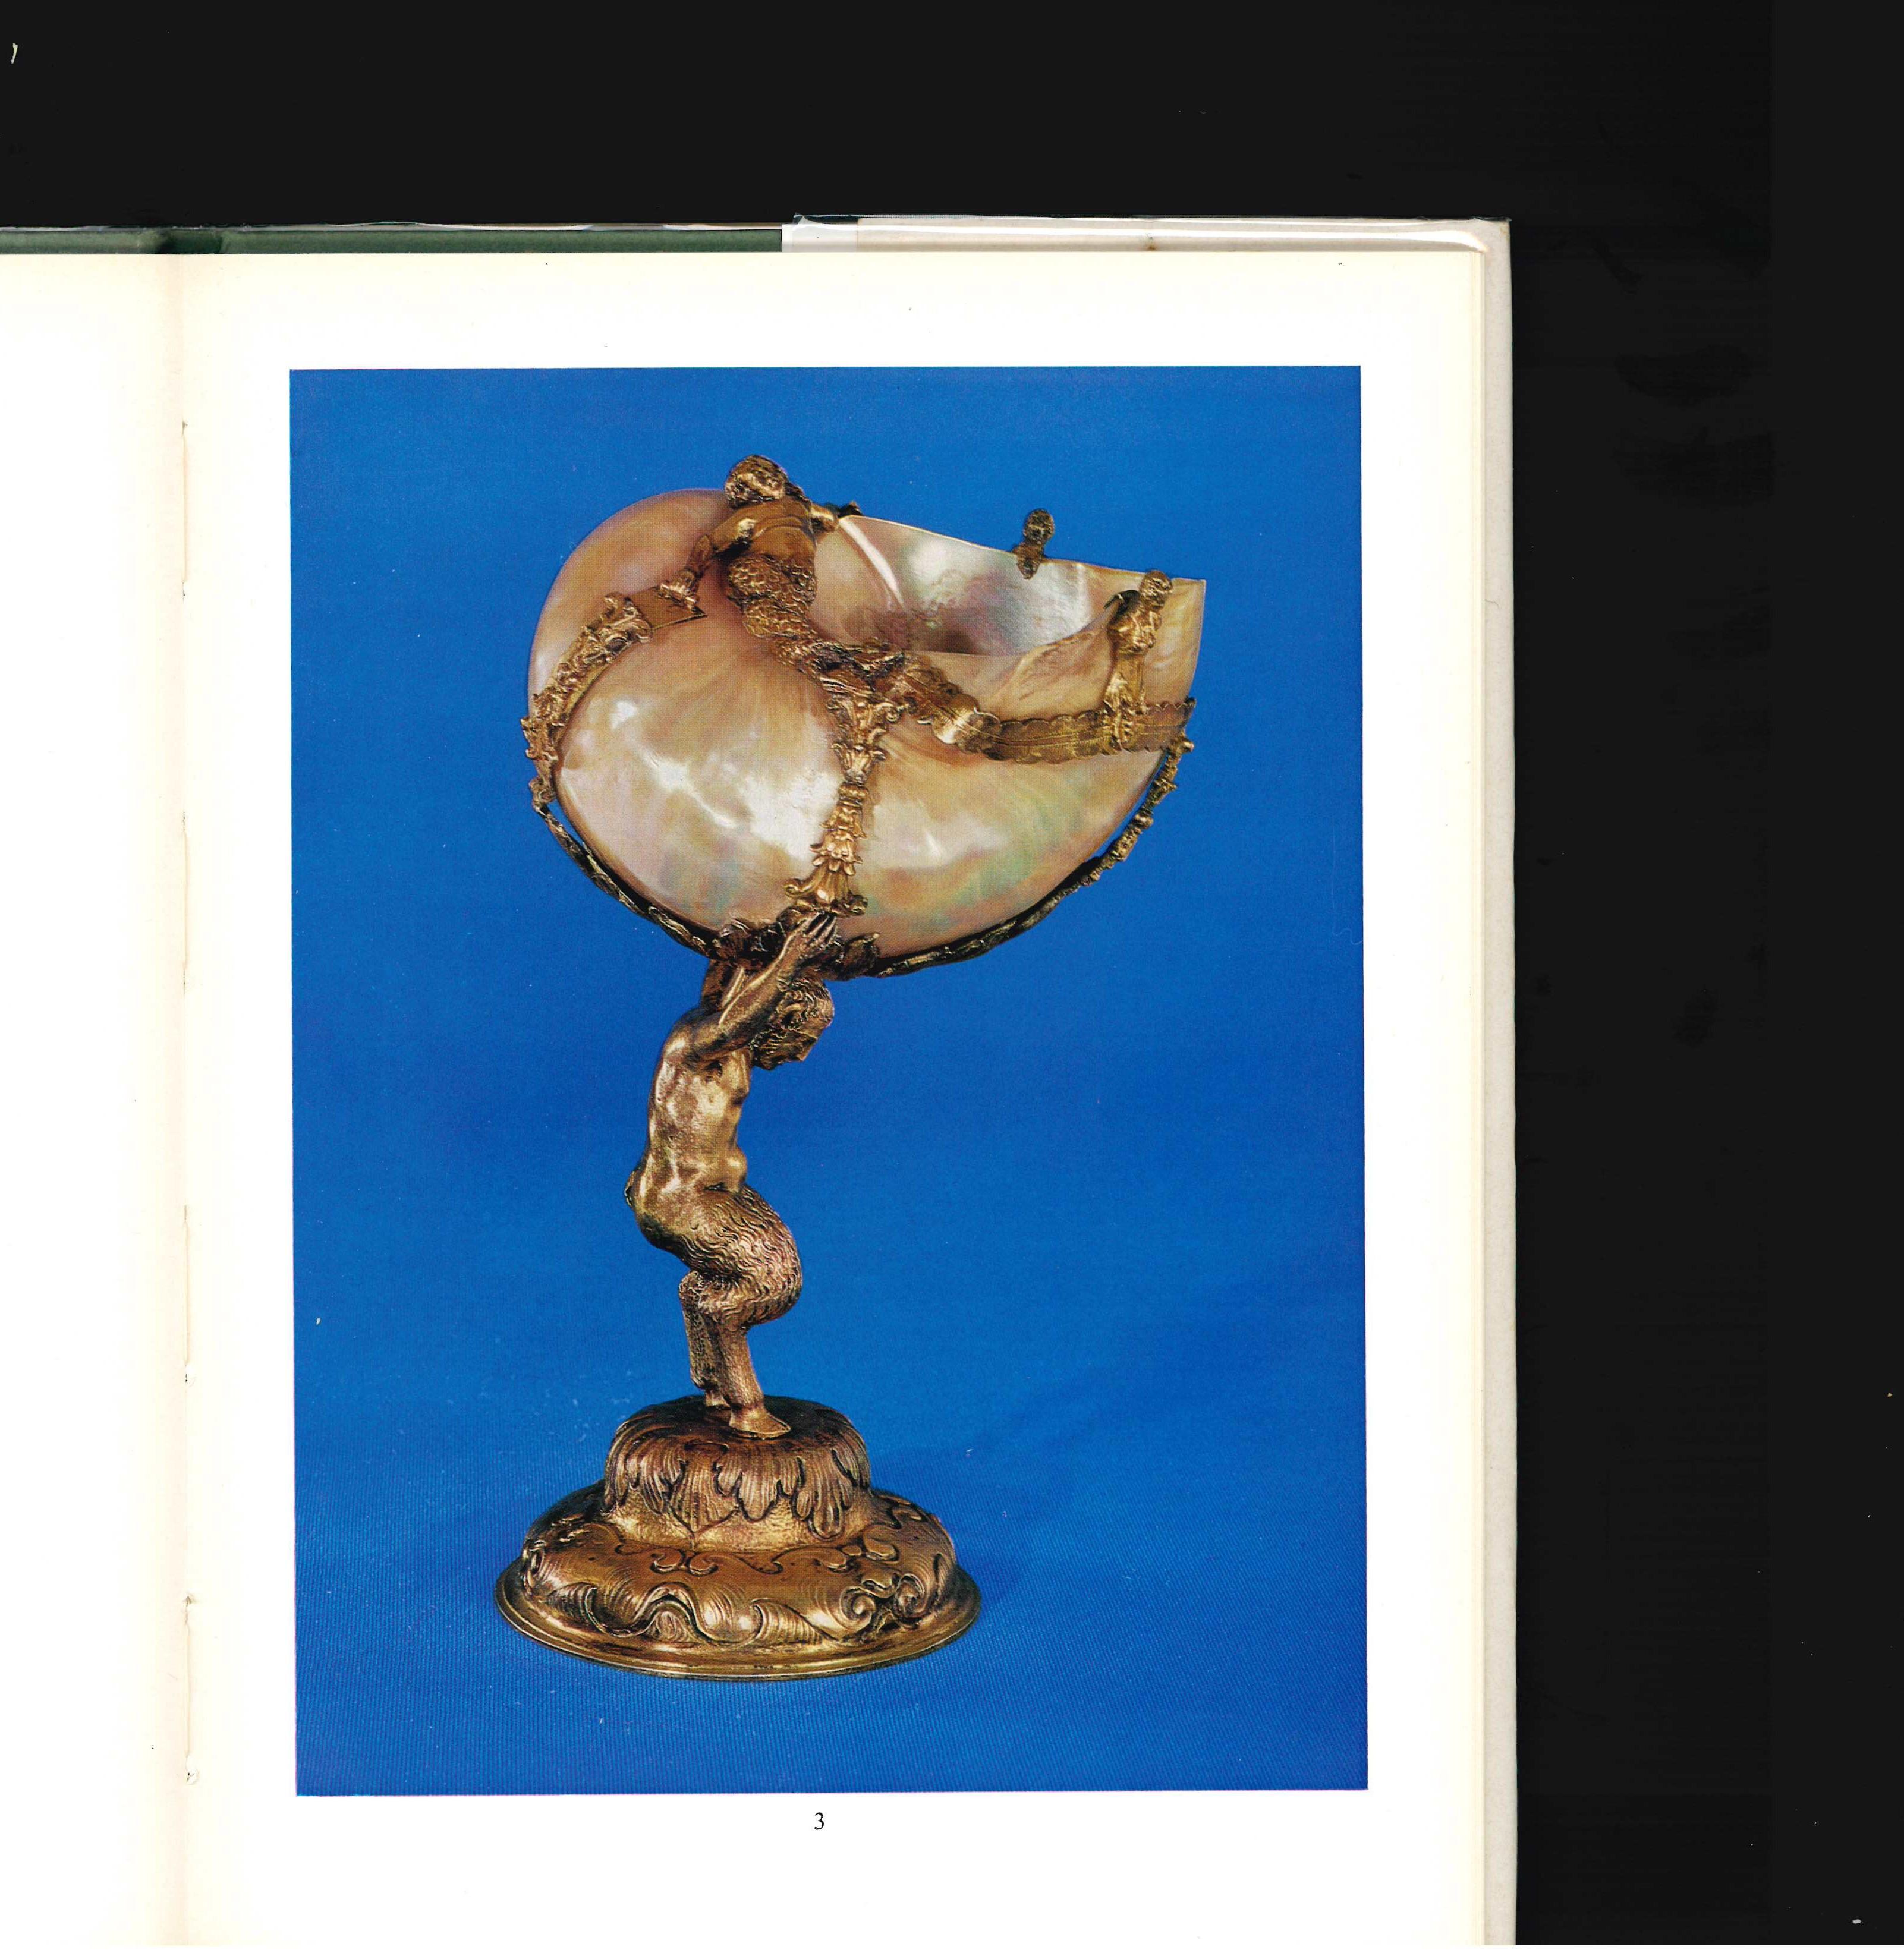 Twenty Five Renaissance Jewels and Works of Art from the collection of the late Arturo Lopez-Willshaw. This is the sale catalogue produced by Sotheby's in June 1974 for the disposal of pieces taken from the fabulous collection of Renaissance Jewels,